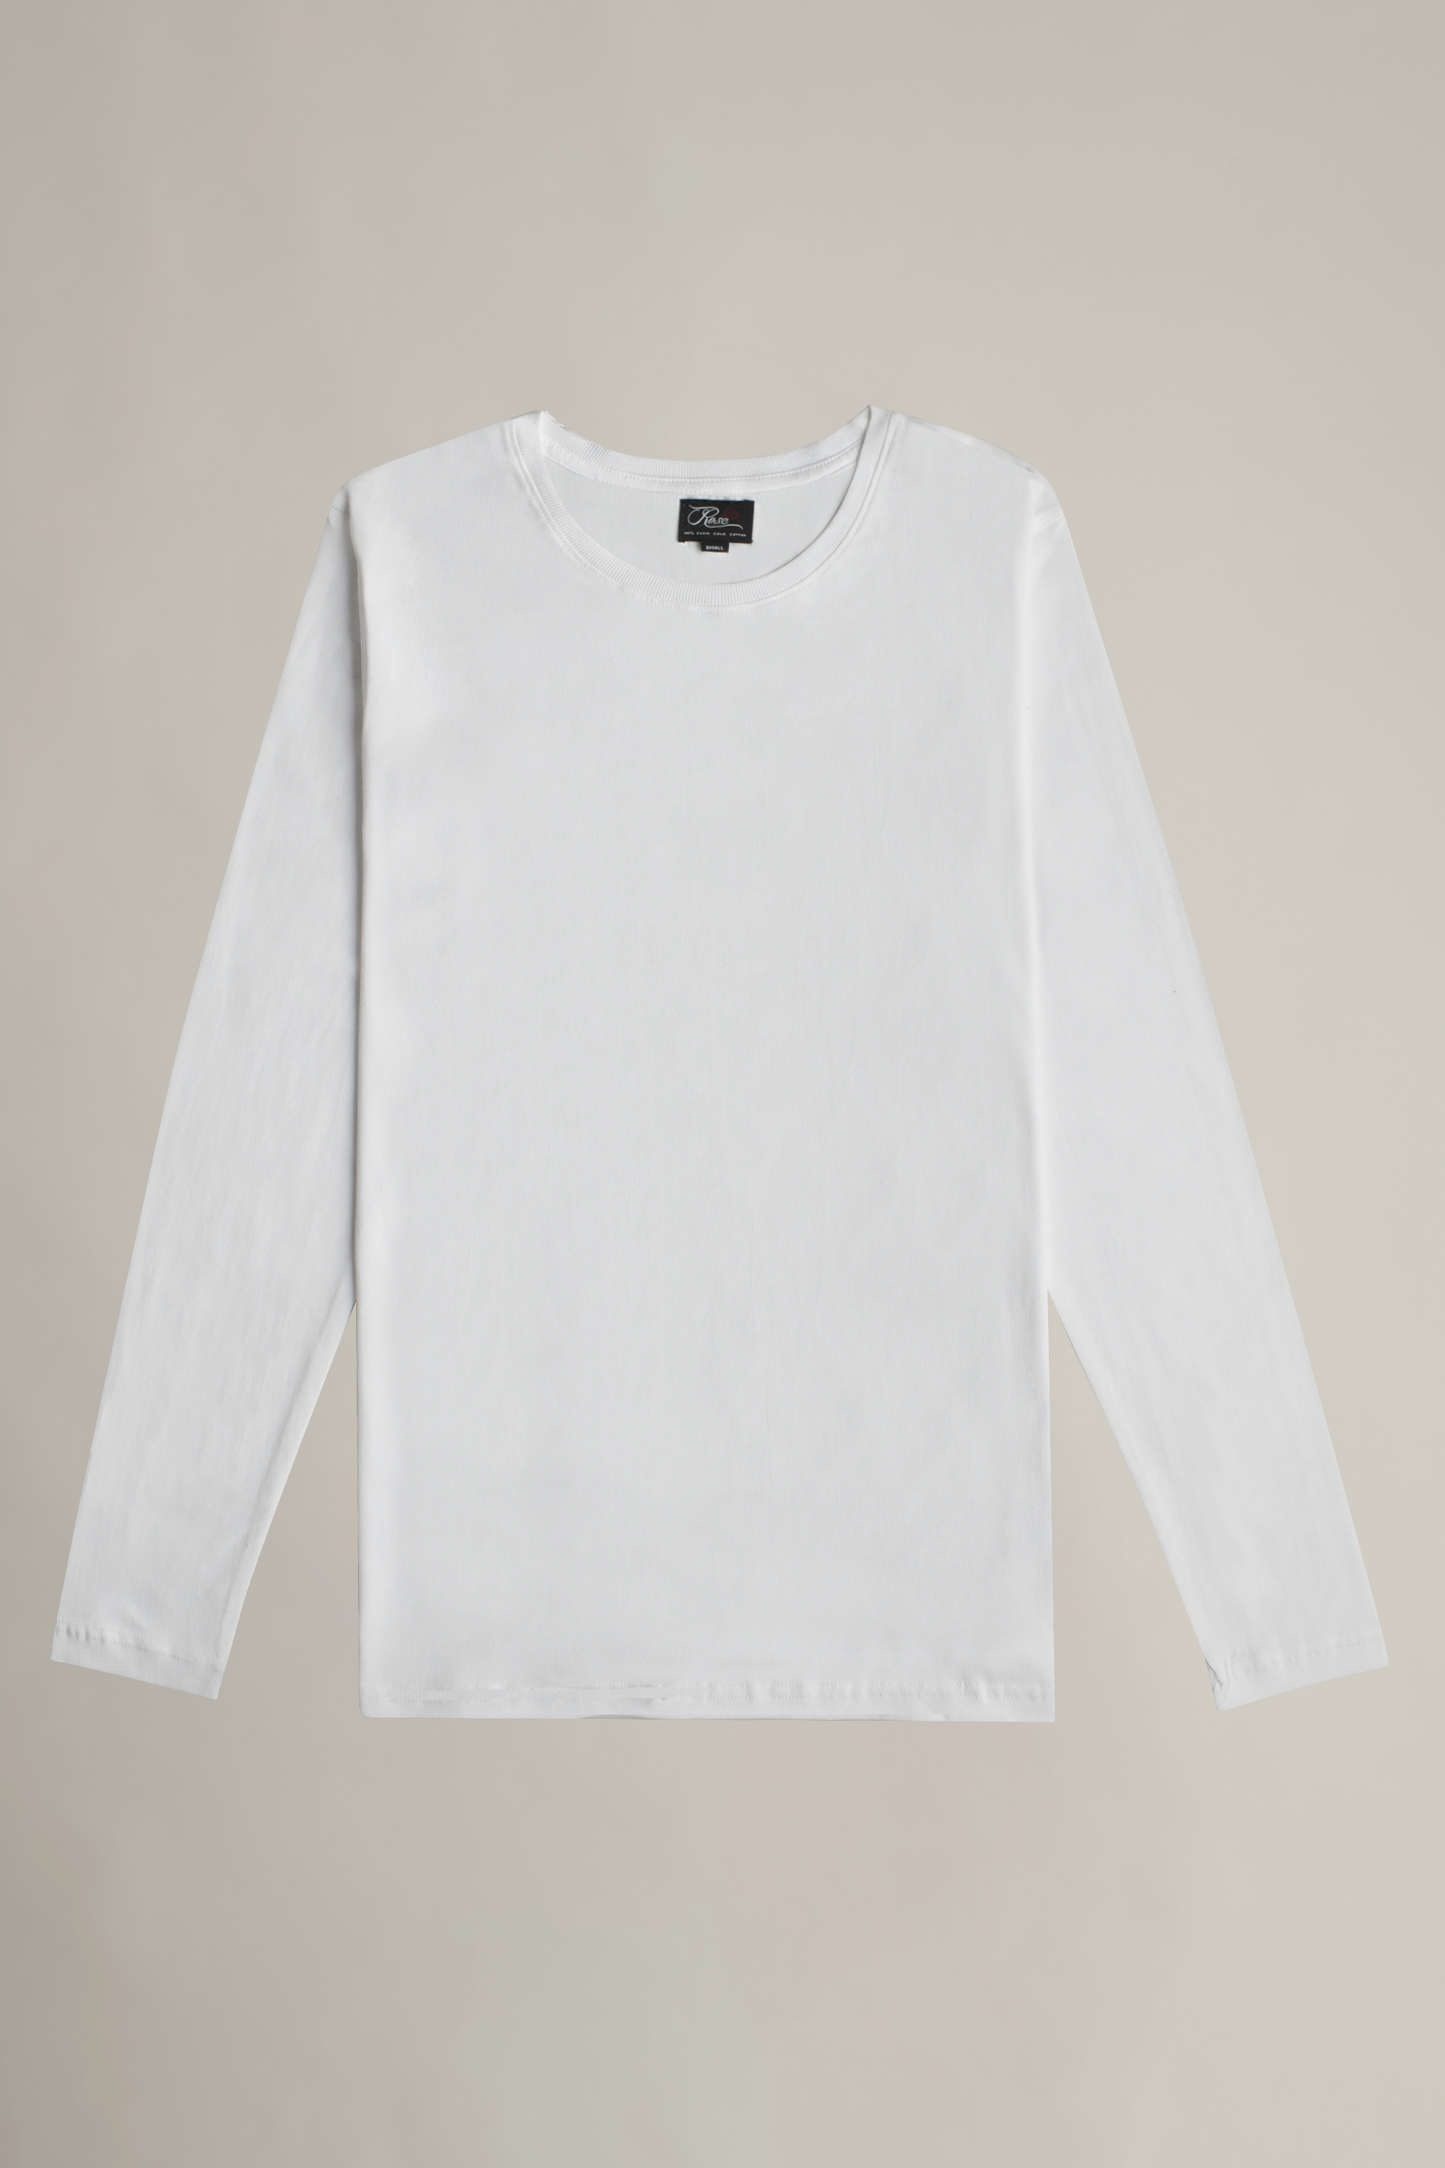 Suvin Gold Long Sleeve Round Neck T-Shirt- White